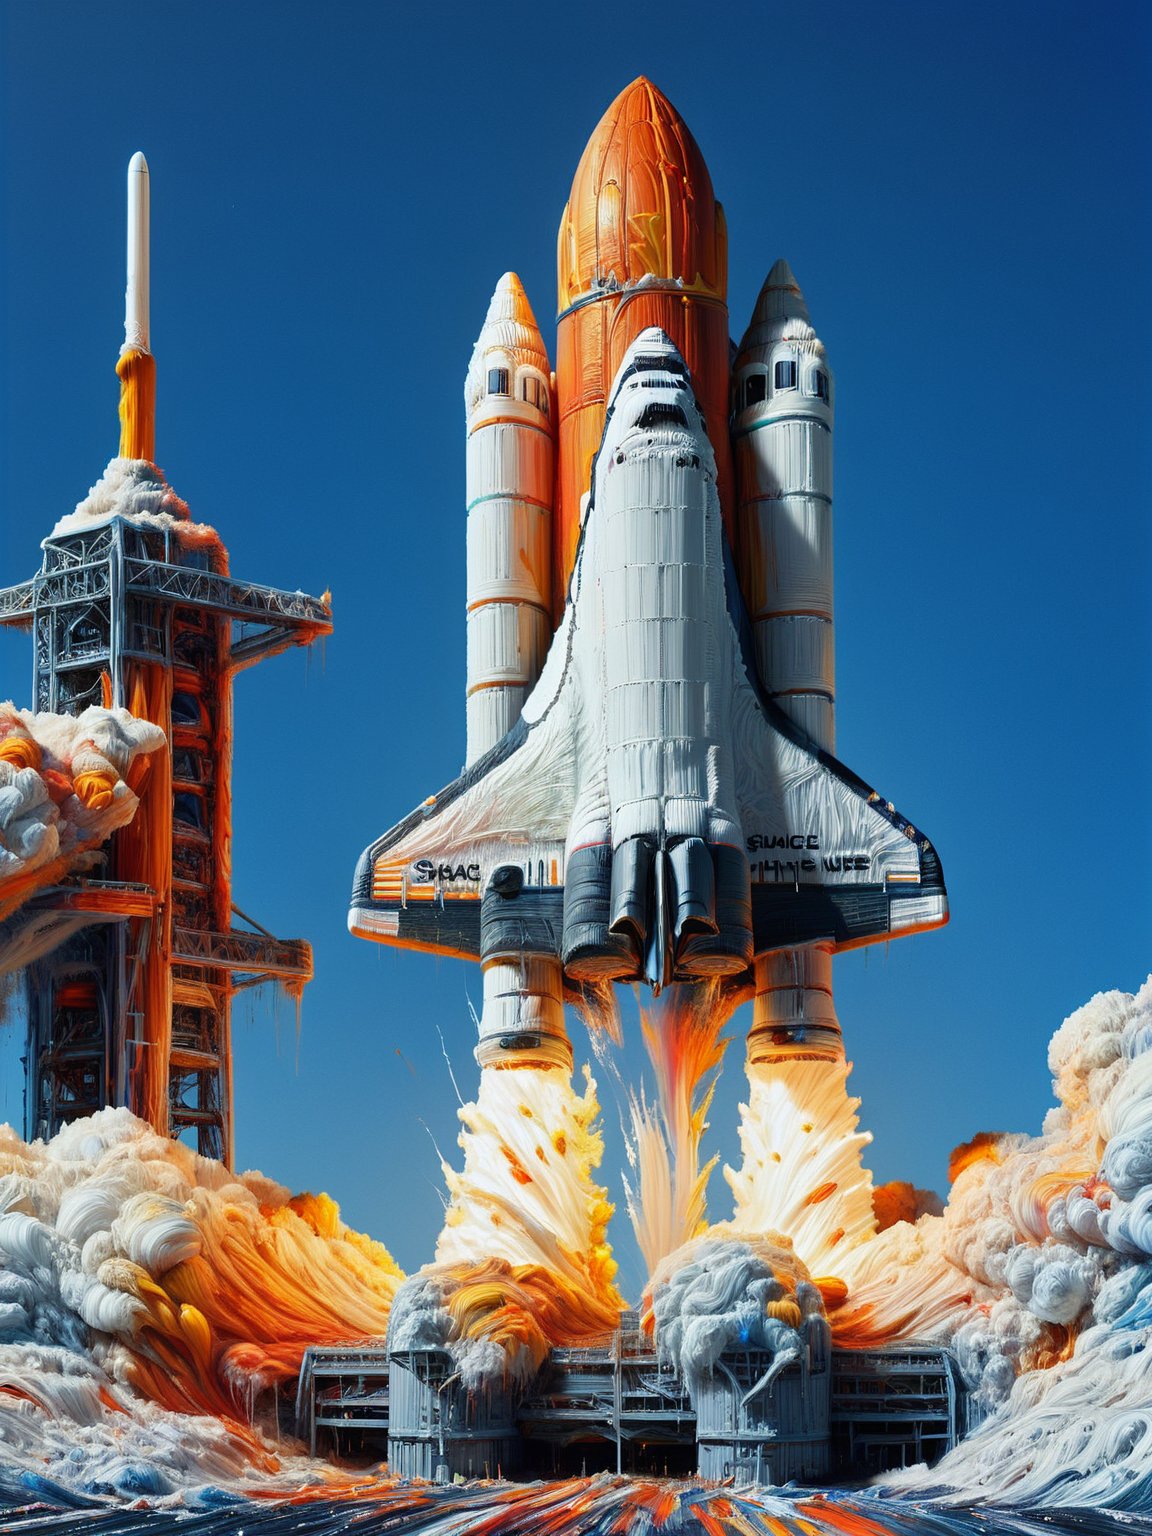 A space shuttle launch scene where the shuttle is covered in ais-acrylicz, creating a brilliant tableau against the blue sky <lora:Acrylic_Paint_Style_SDXL:1>